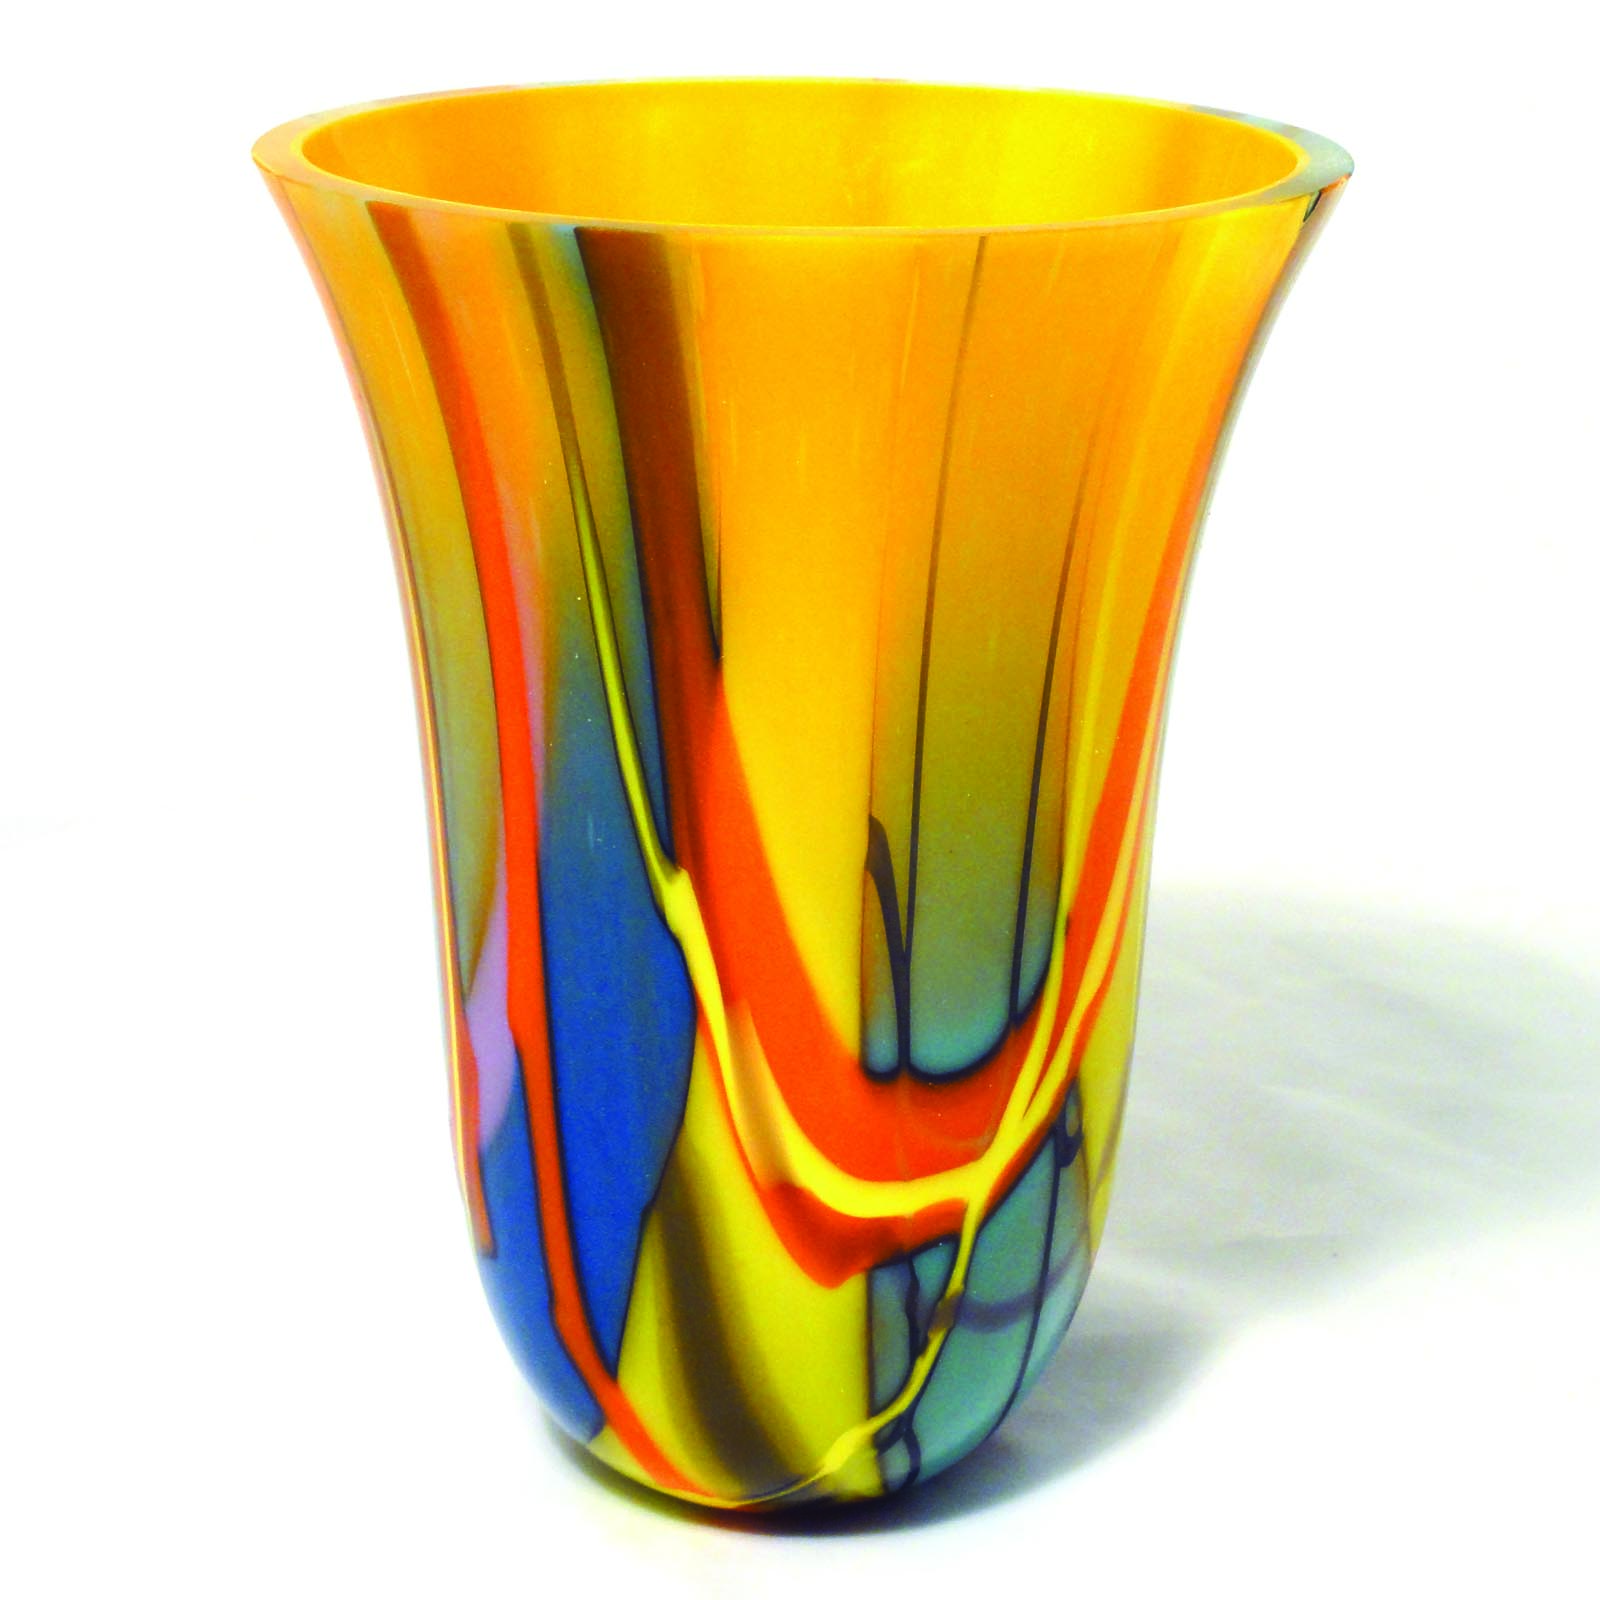 Multicoloured midsize glass vase vessel - contemporary glassware hand made in Ireland by Keith Sheppard Glass Artistry, Northern Ireland